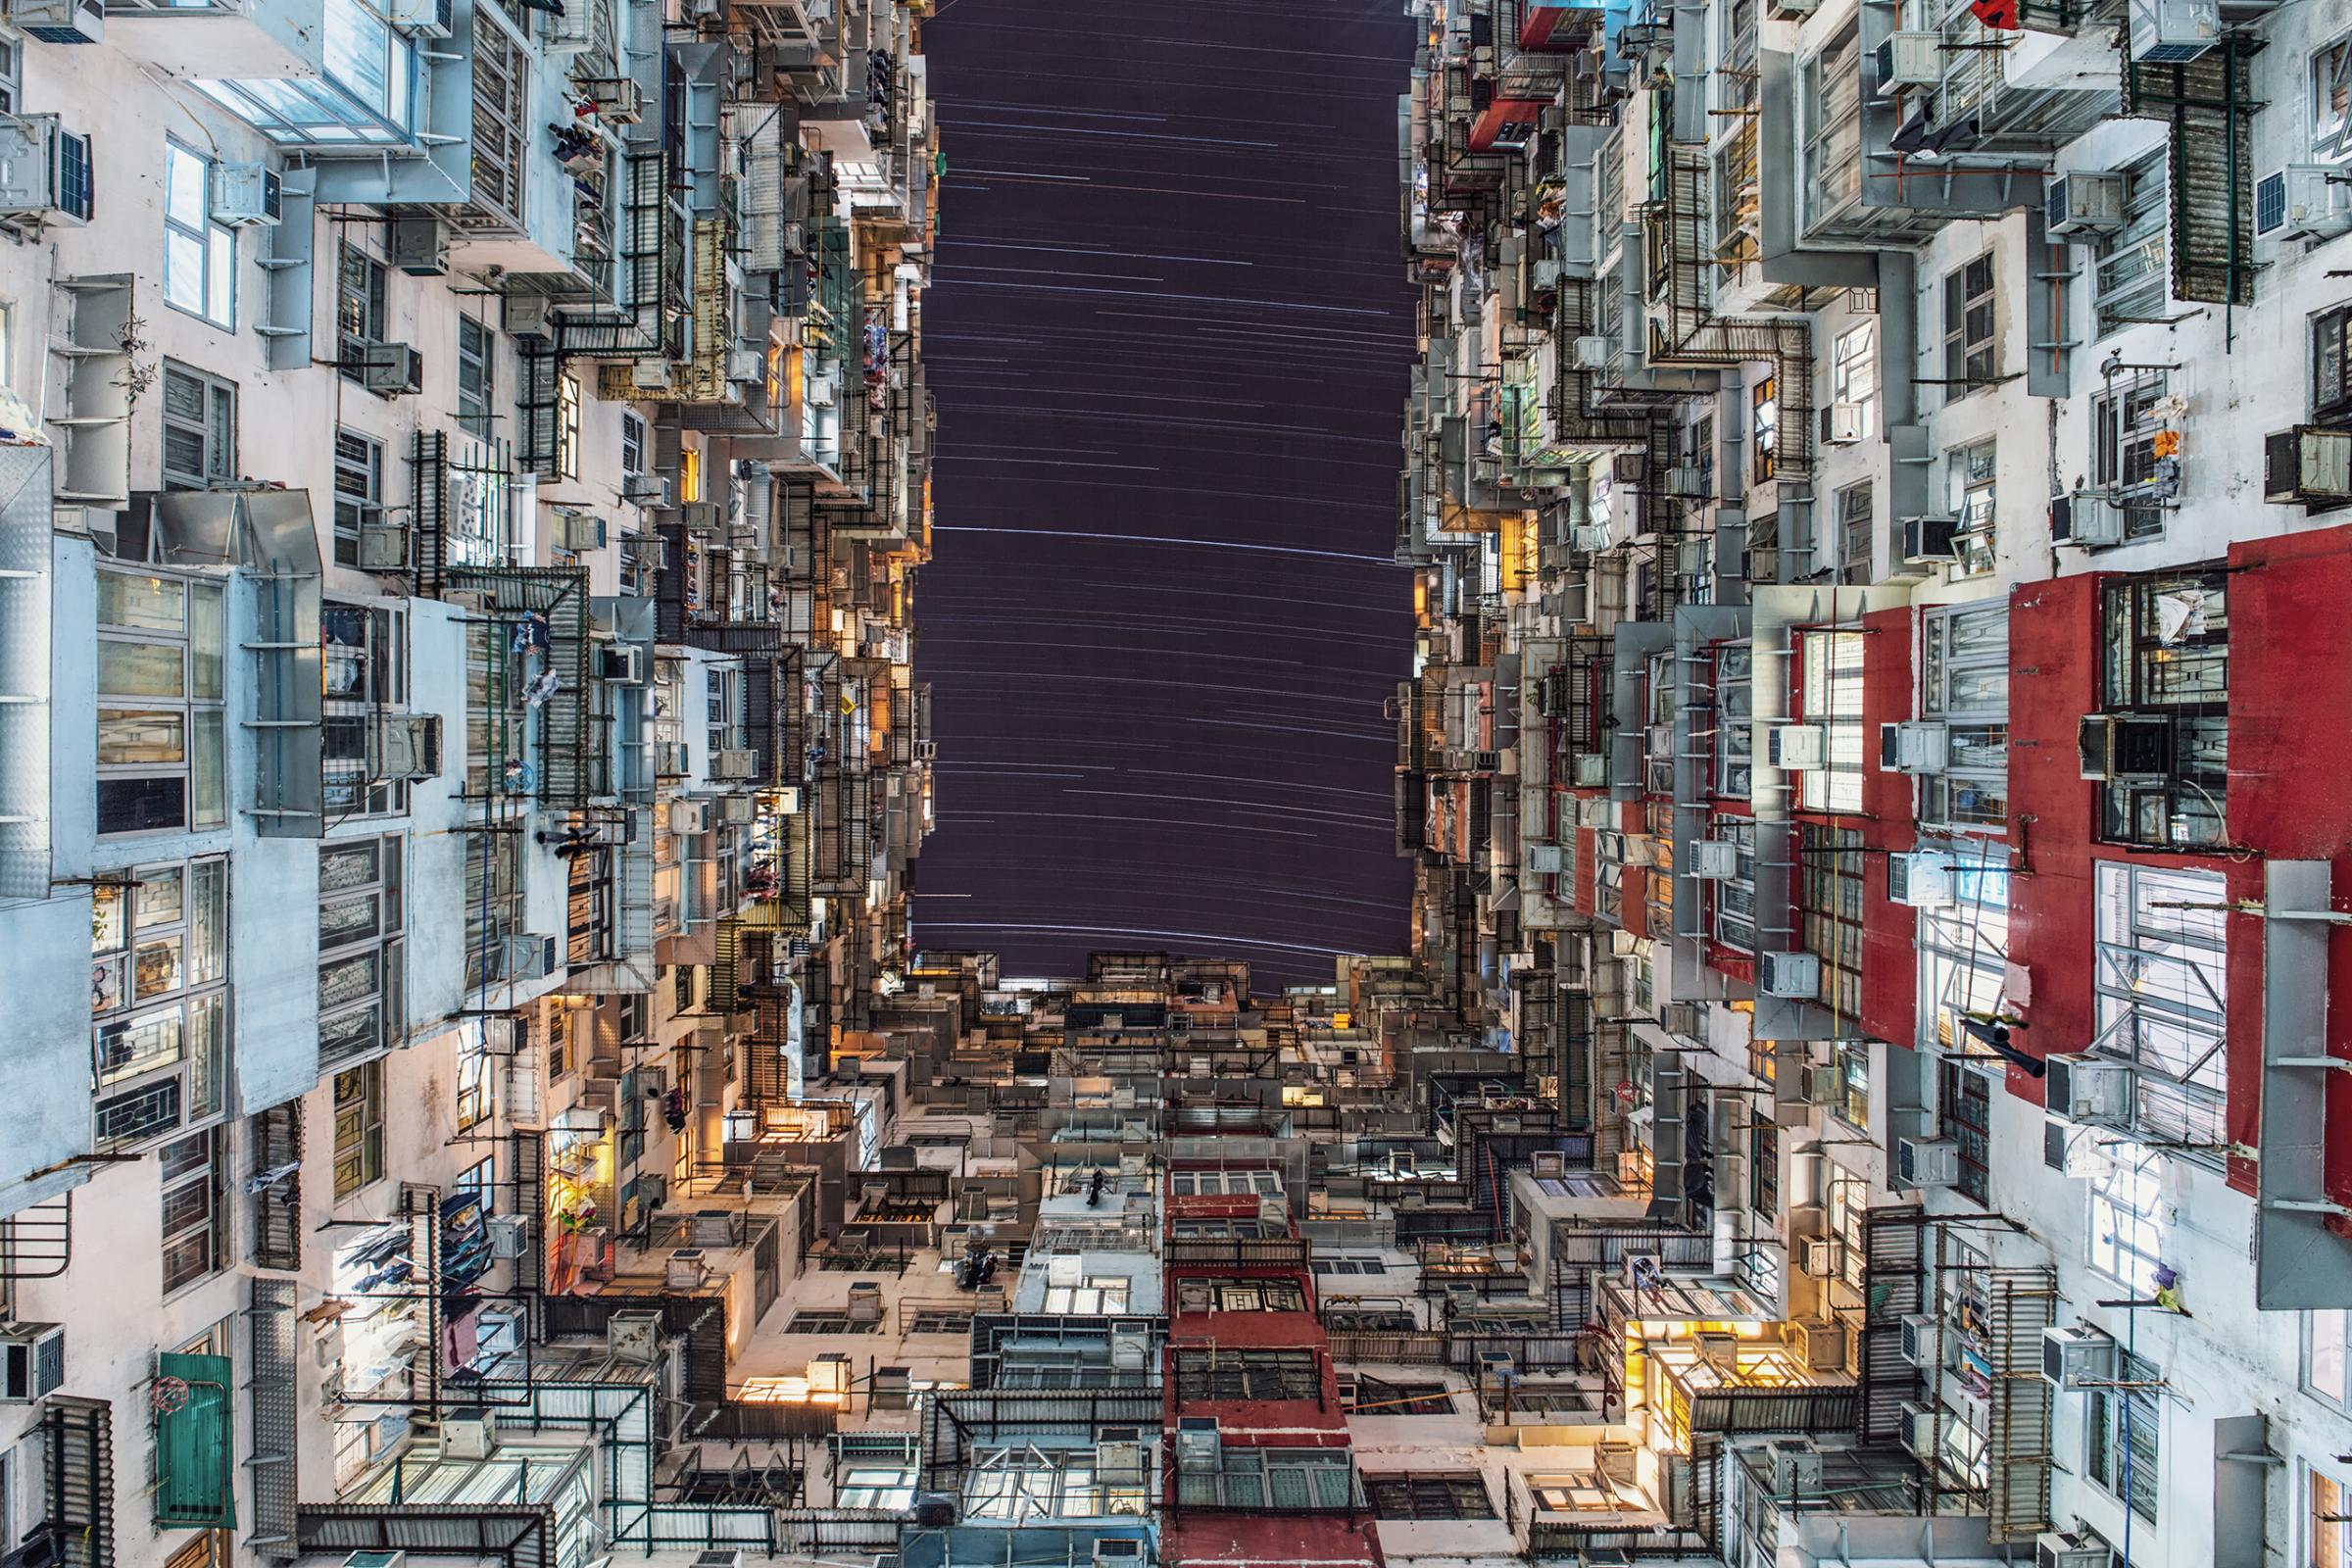 People and Space:Wing Ka Ho took this photo in Quarry Bay, Hong Kong. Due to light pollution from the city's many lights and neon signs, "only a few stars can be seen regularly... on some of the clearest evenings," he writes.